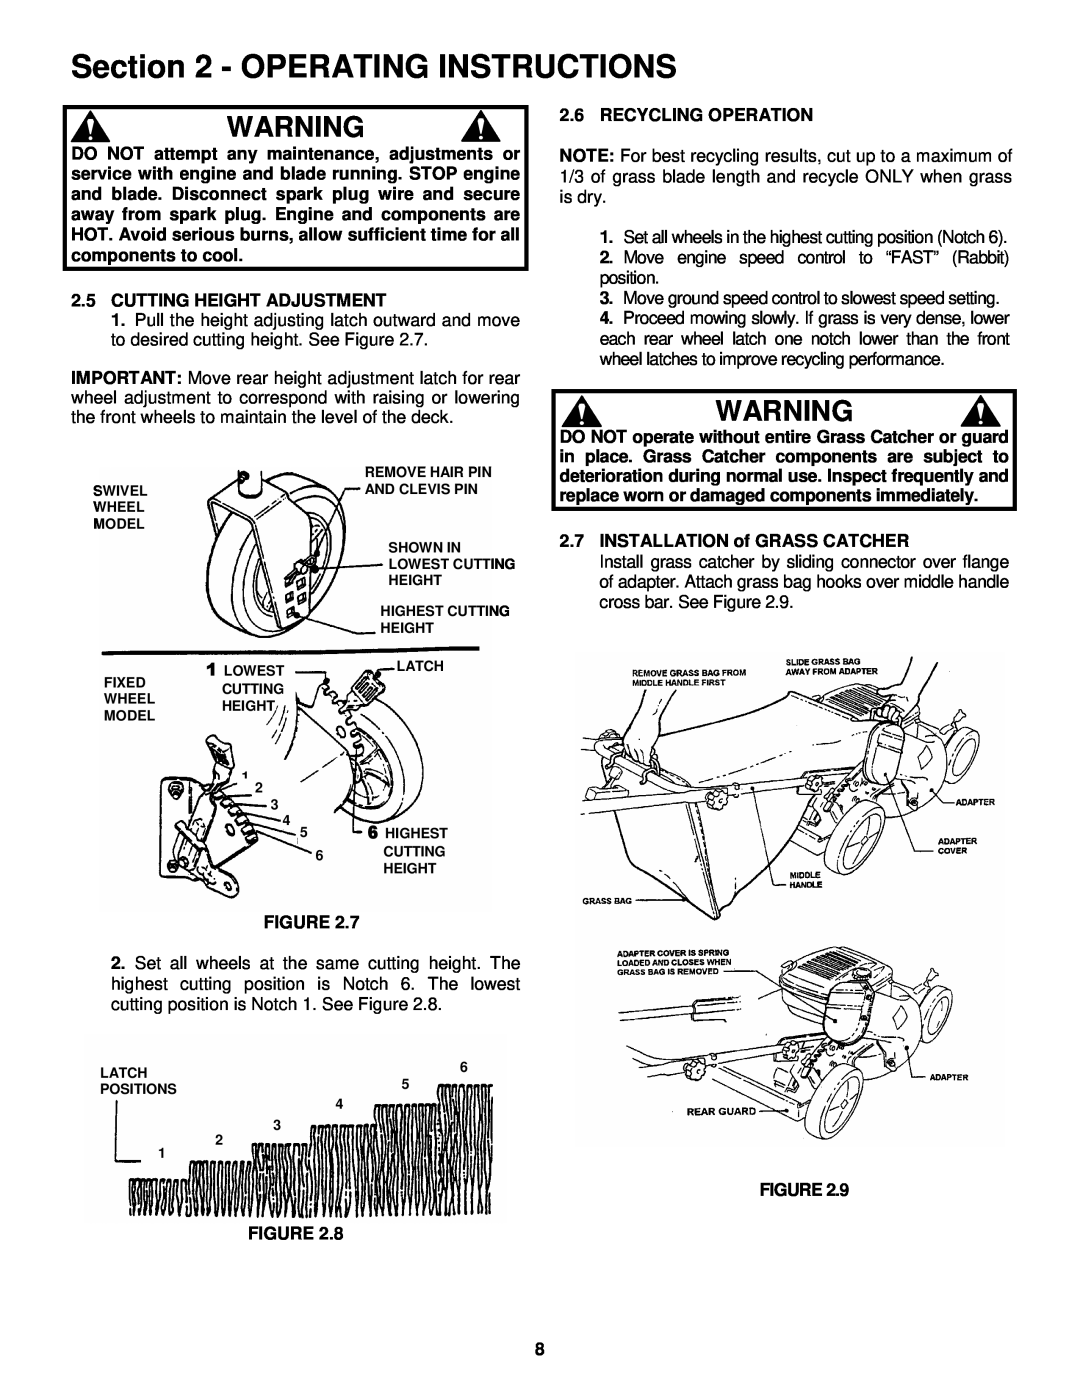 Snapper EMRP216015B Operating Instructions, 2.5CUTTING HEIGHT ADJUSTMENT, Recycling Operation, Figure Figure 